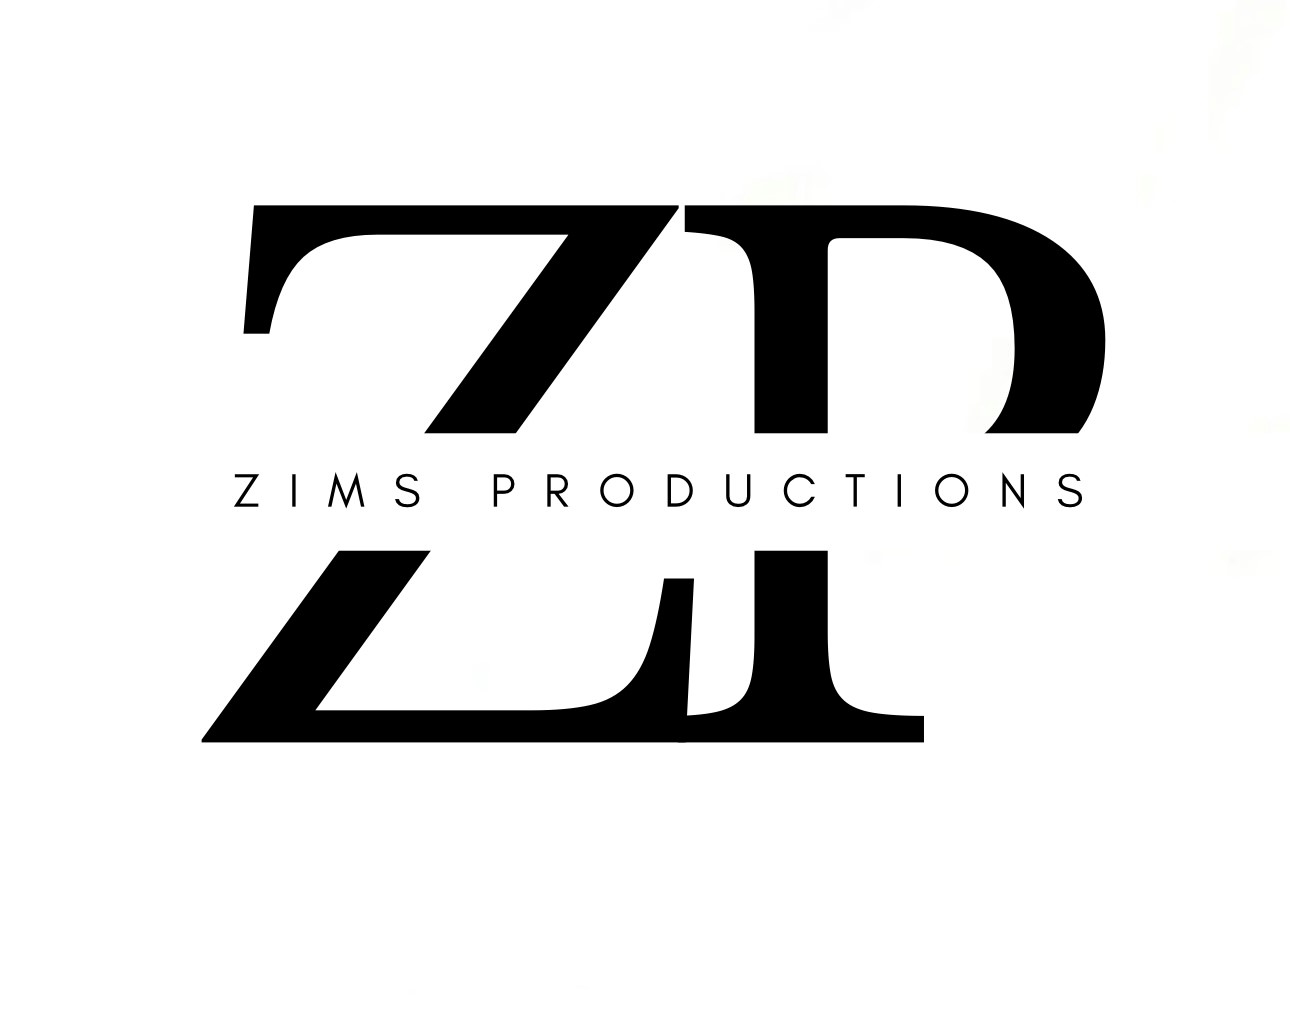 ZIMS Productions